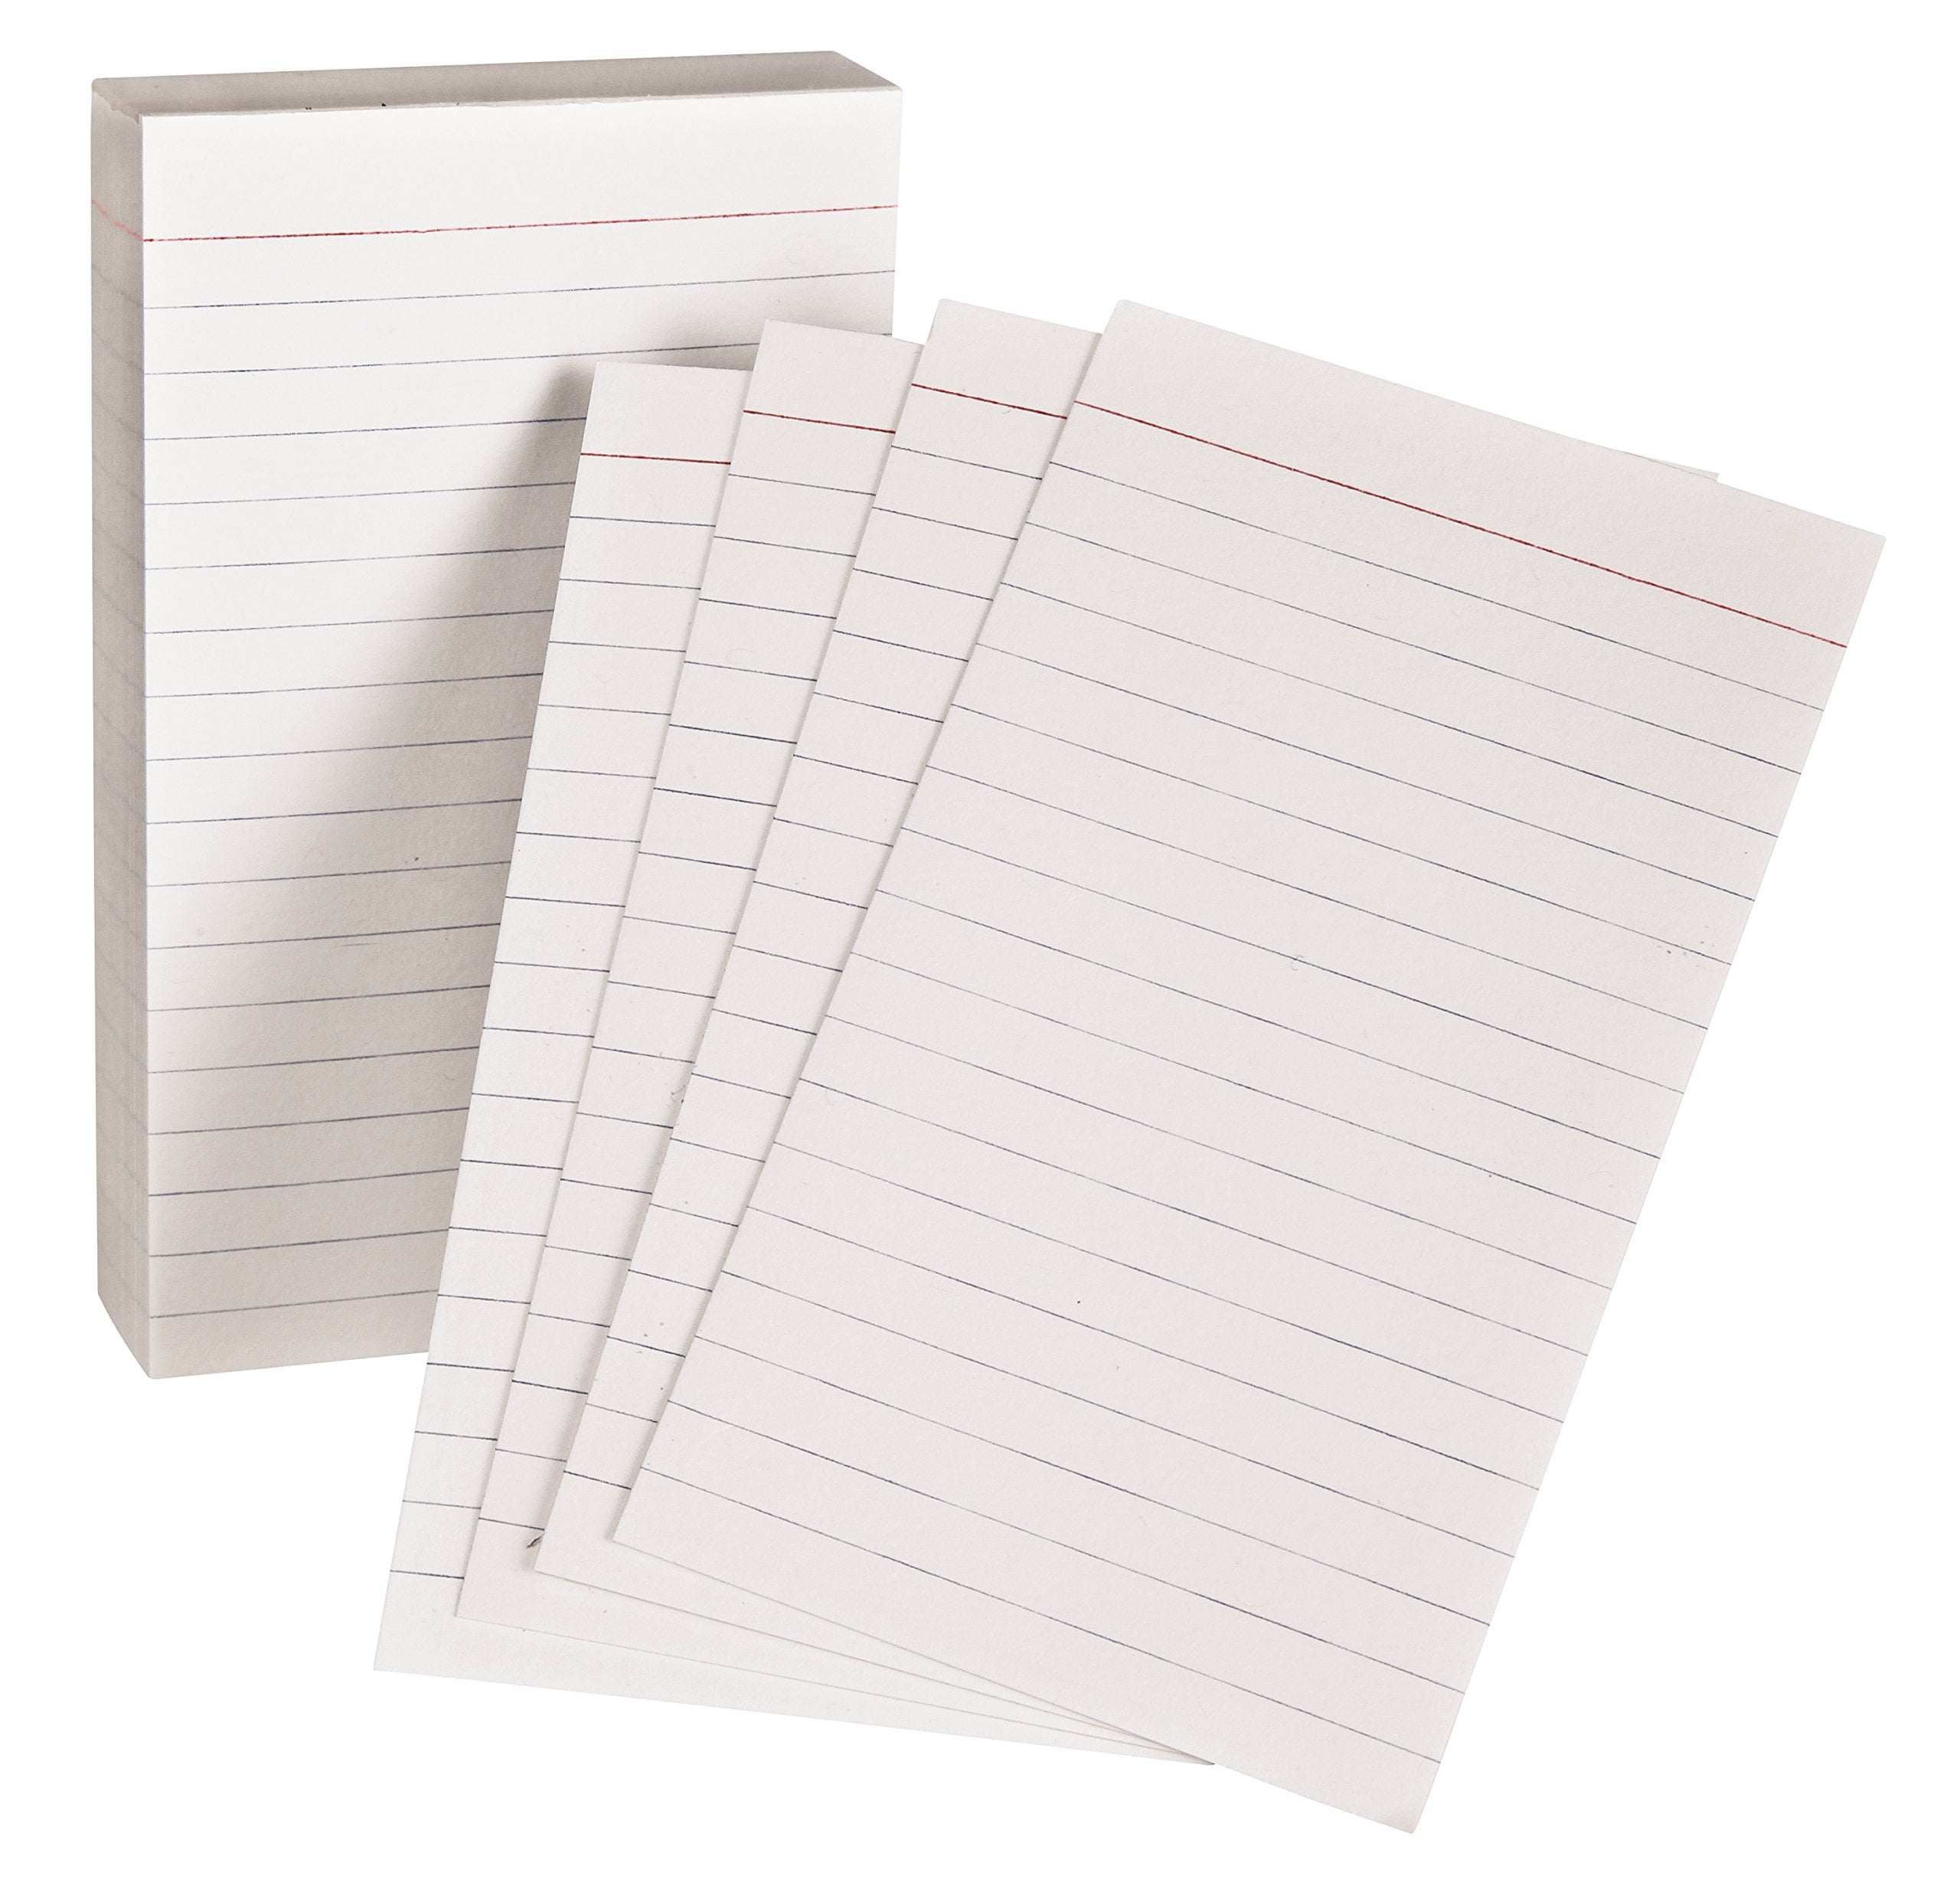 Oxford Blank Index Cards, 3 x 5, White, 100 Per Pack (40135)